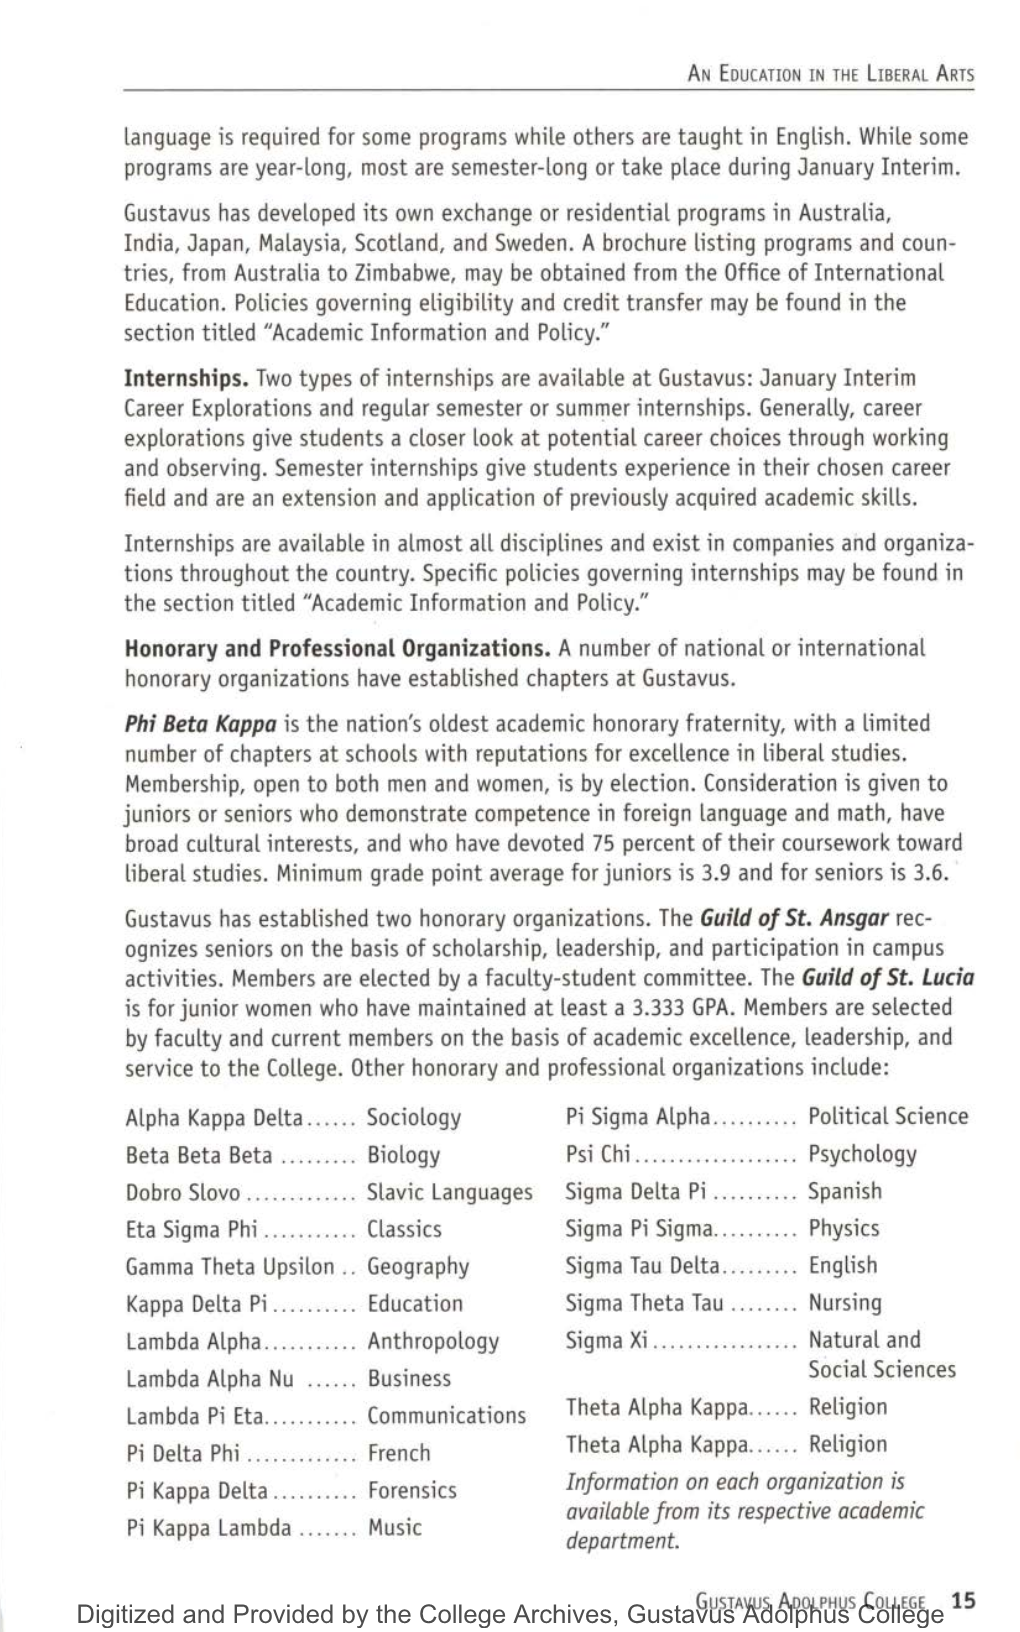 Honorary and Professional Organizations. a Number of National Or International Honorary Organizations Have Established Chapters at Gustavus